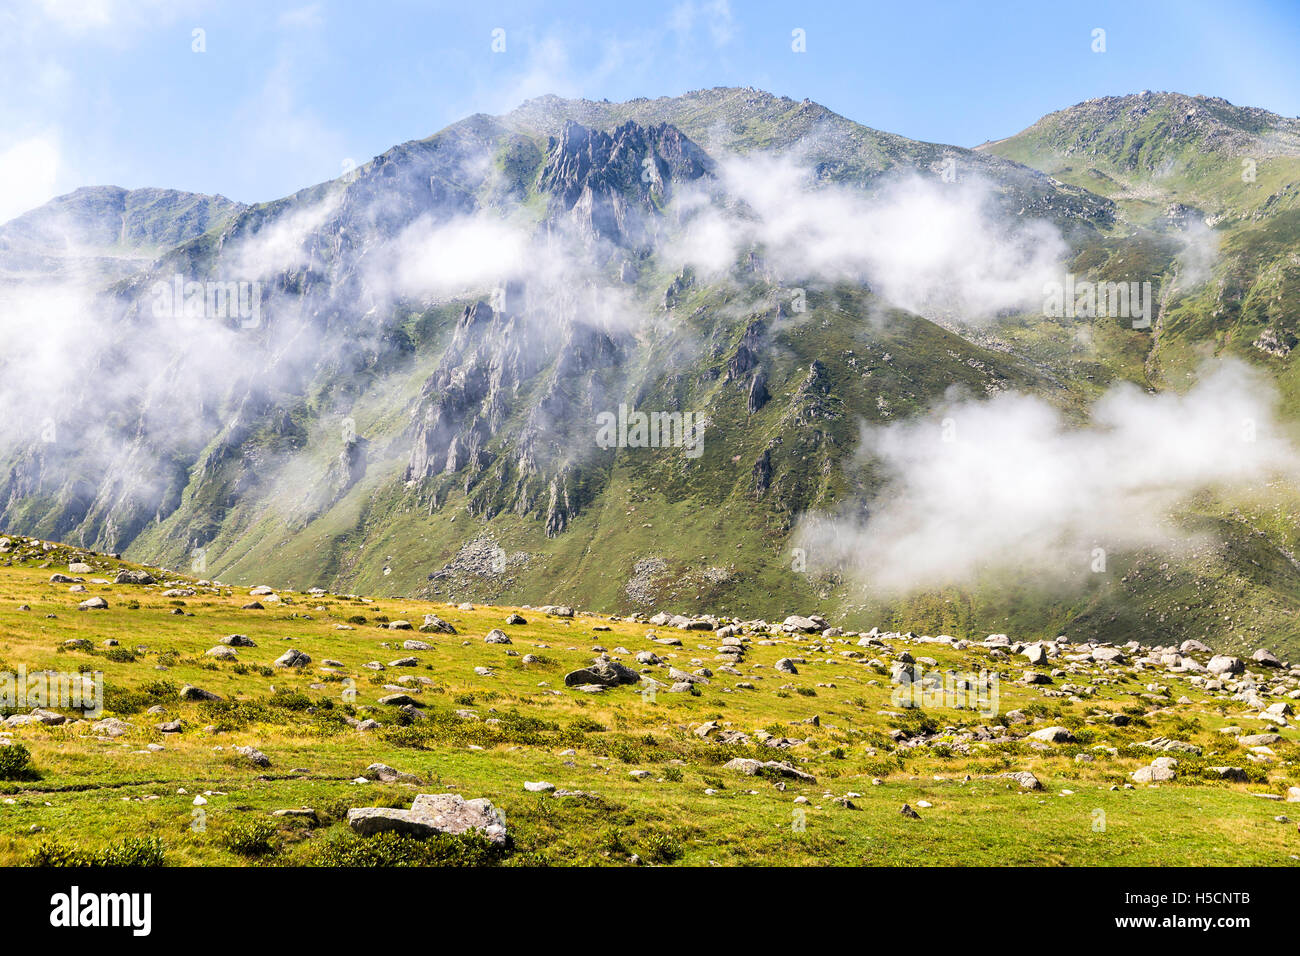 Foggy Kackar mountains peak with green grassy meadow foreground Stock Photo